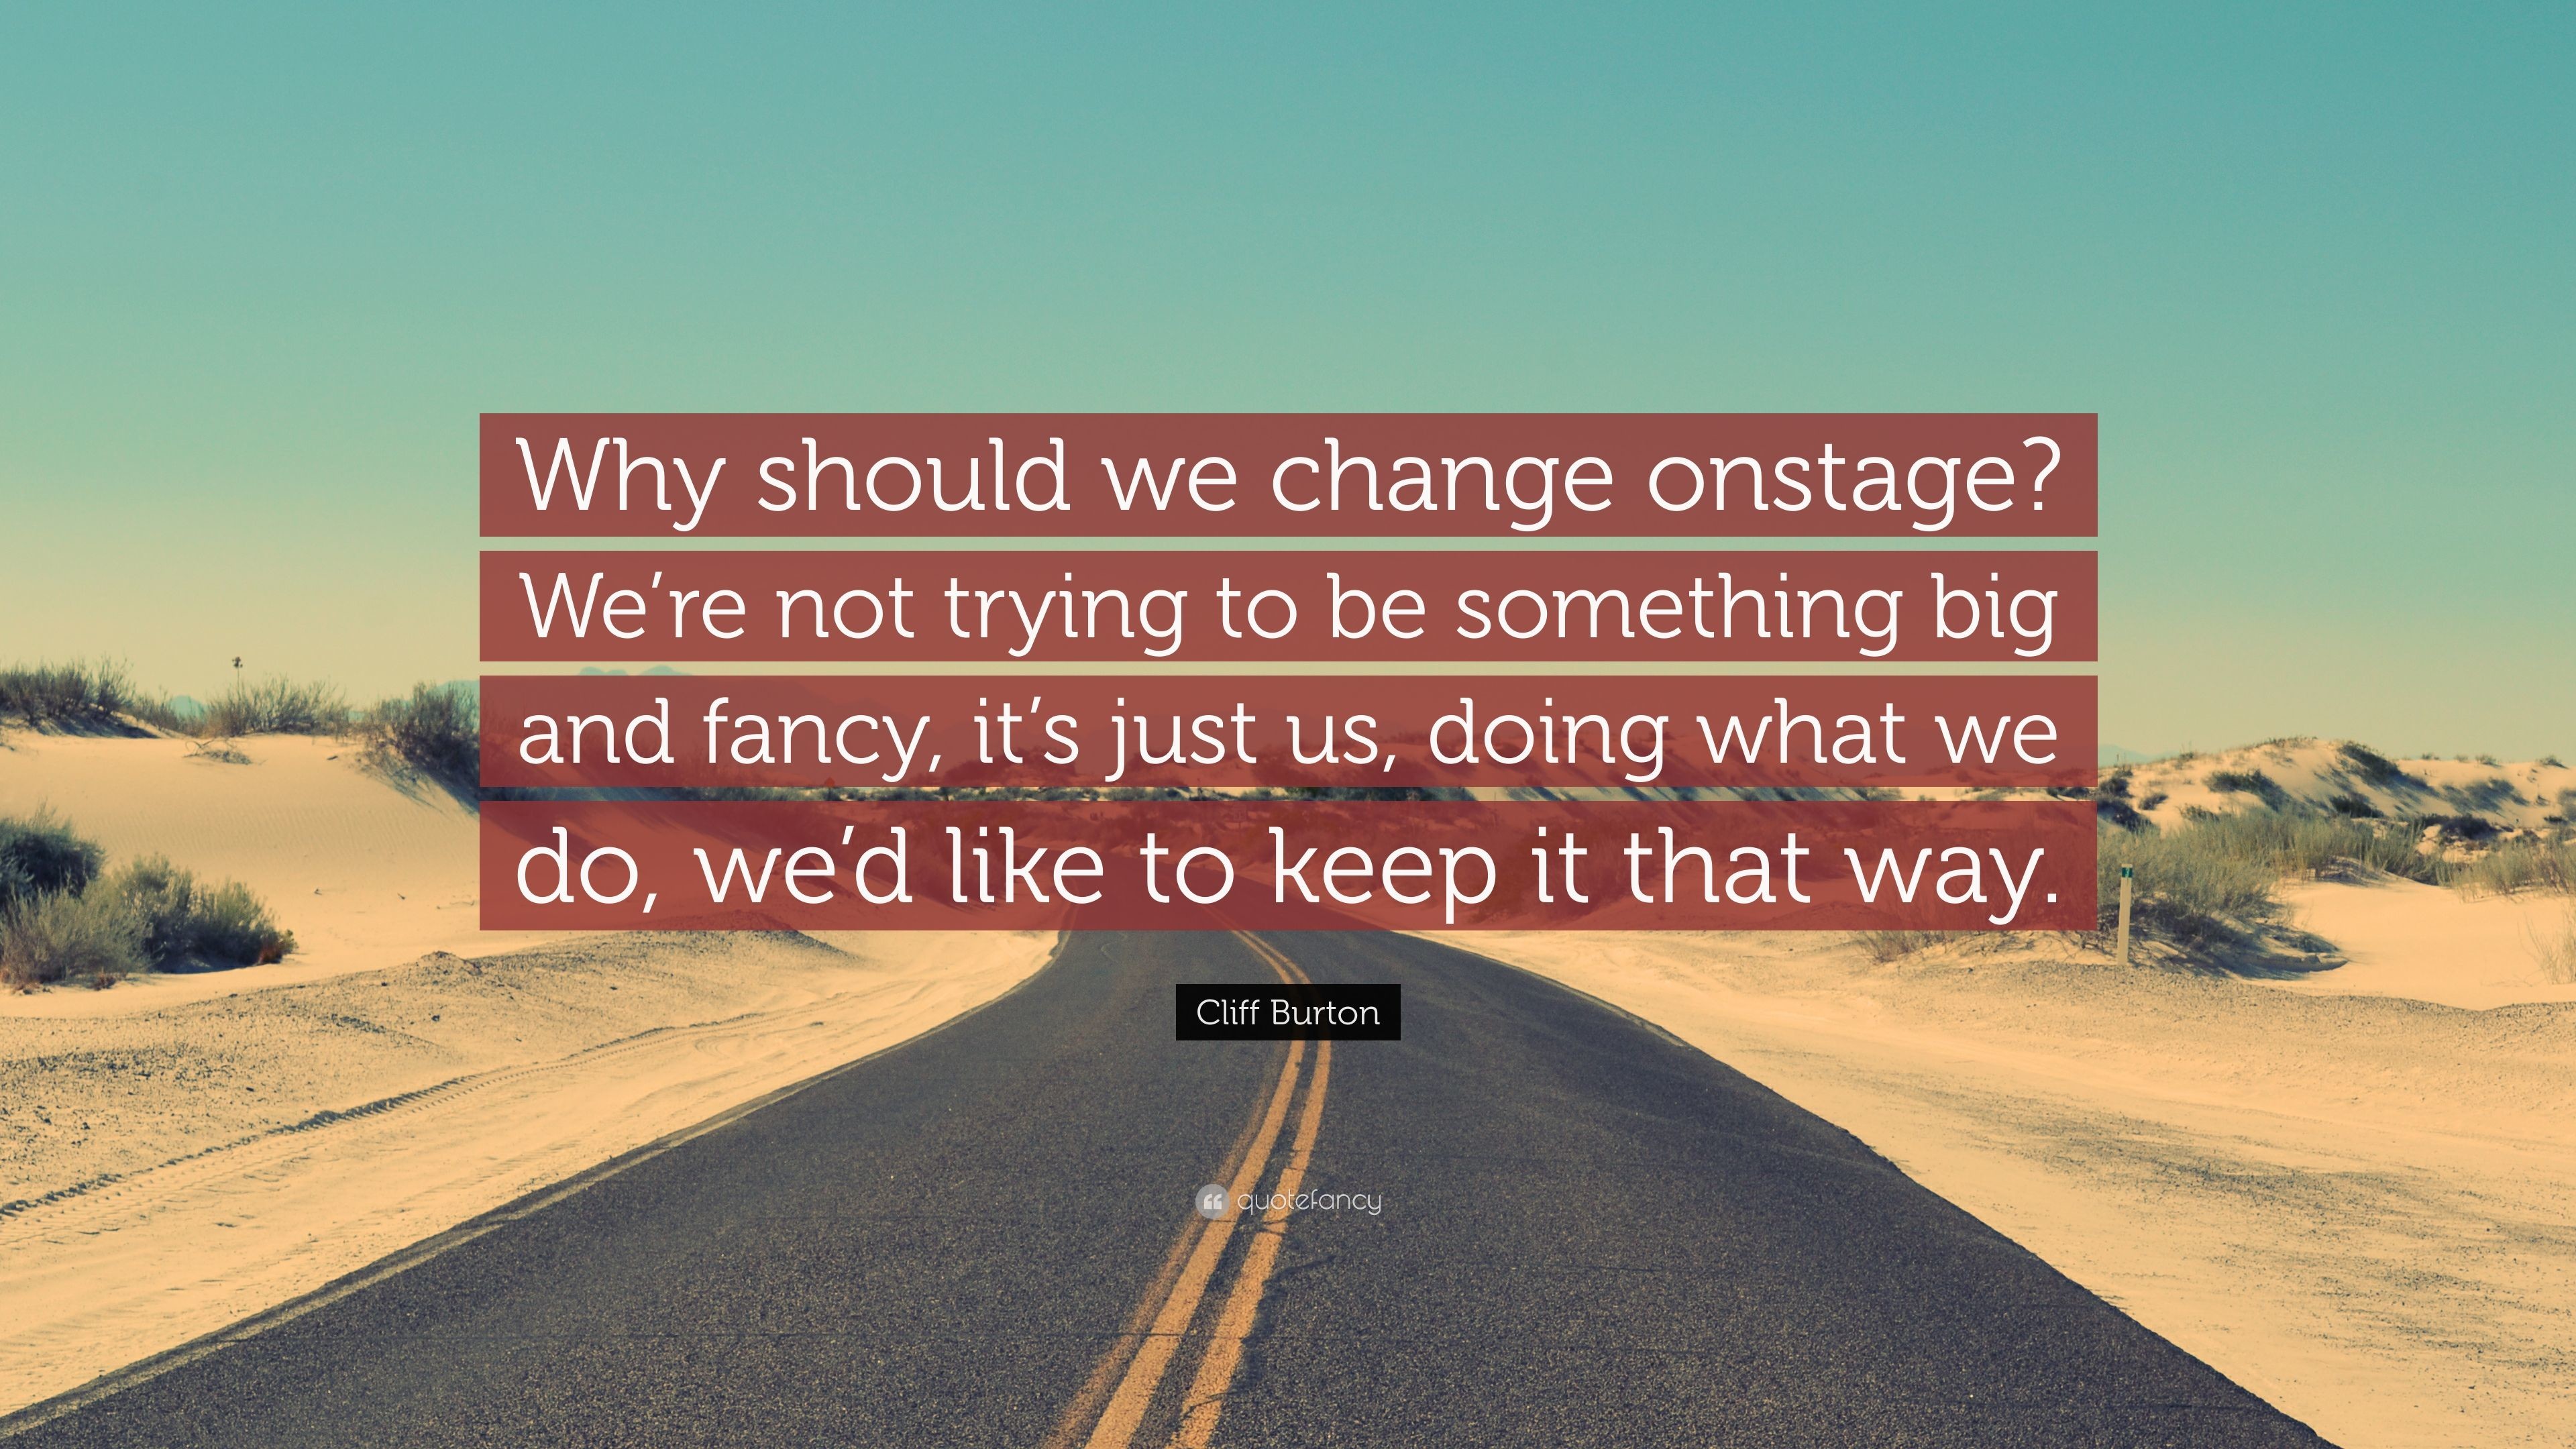 3840x2160 Cliff Burton Quote: “Why should we change onstage? We're not trying